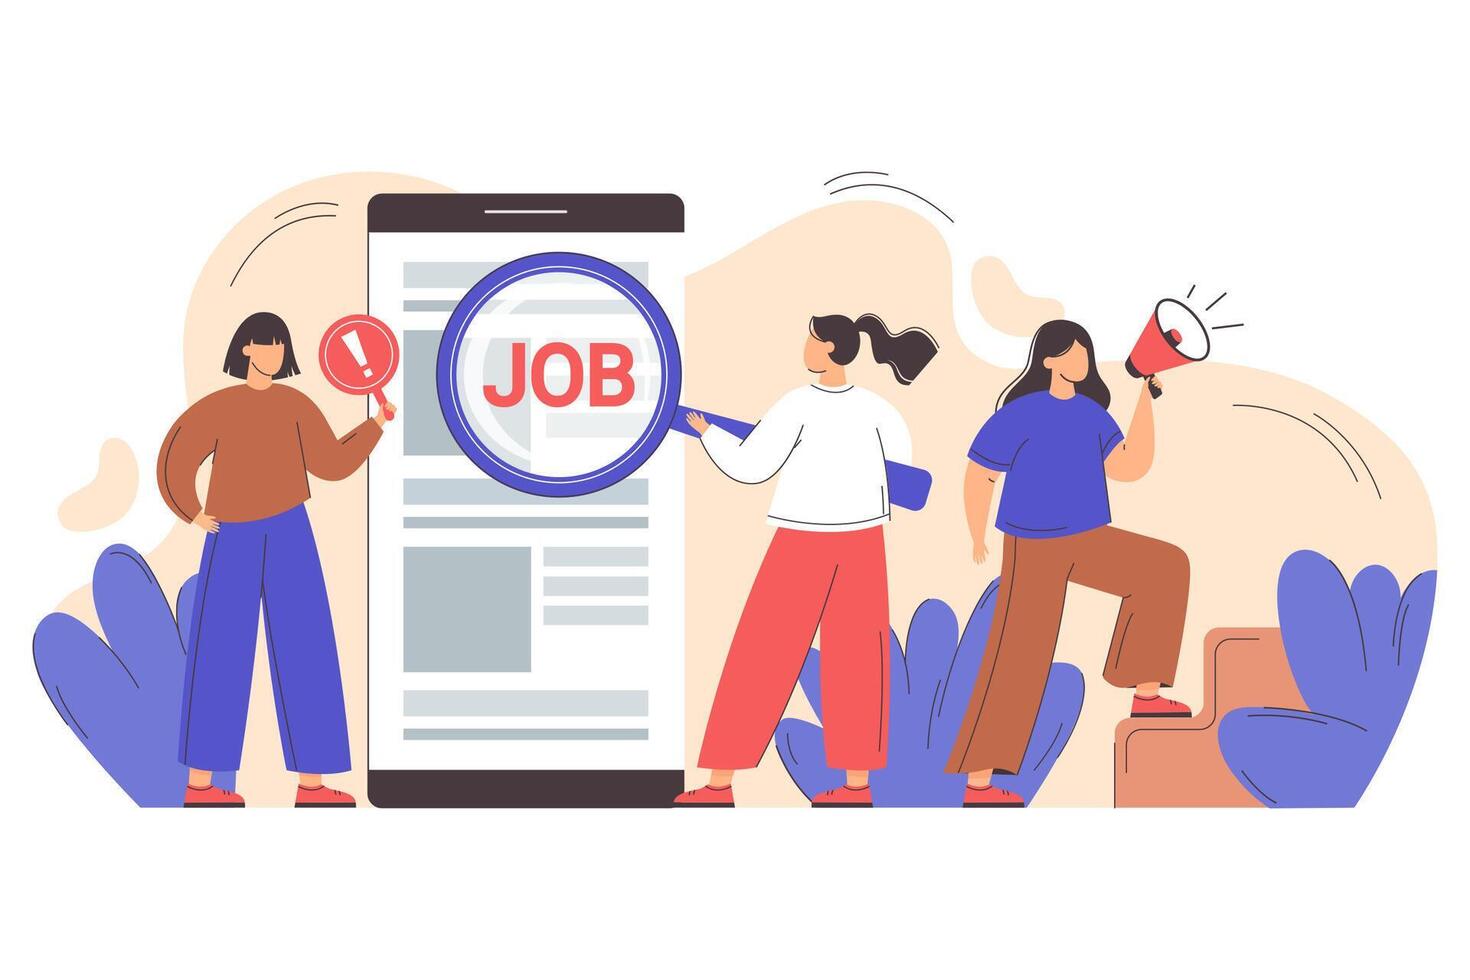 Flat employment hr agency looking for new employees to hire. Recruiting staff search candidates for interview. Hiring and online recruitment concept. Headhunters find resumes and offer vacancy job vector